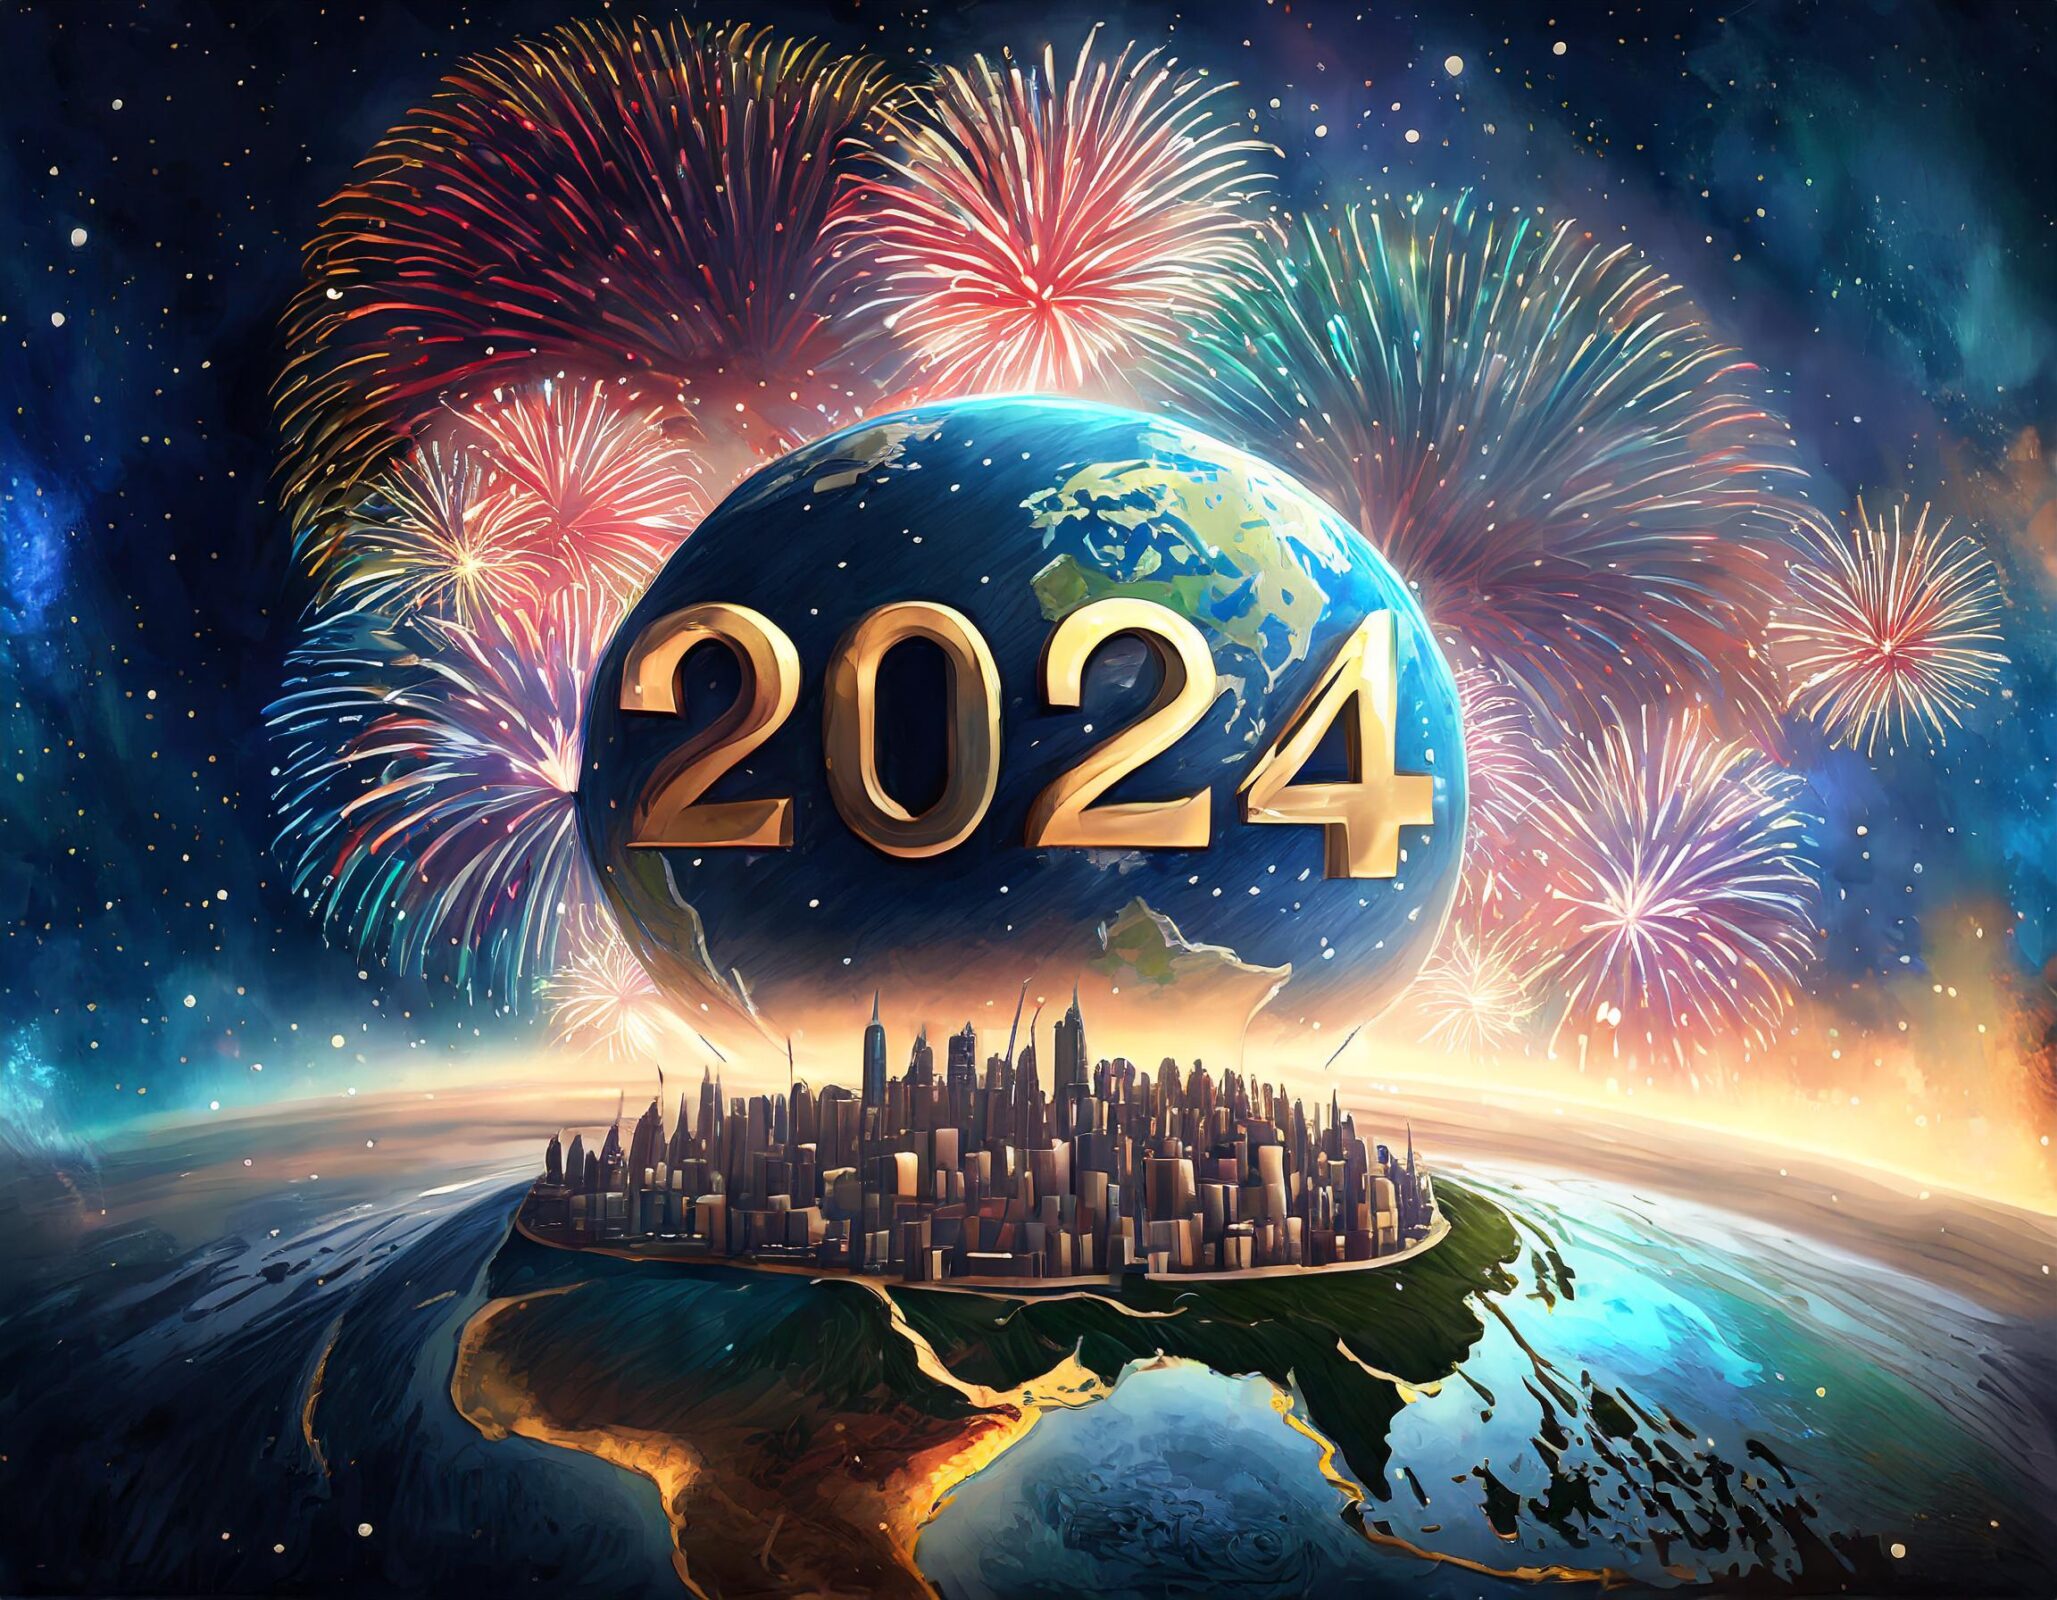 What’s on the Minds of Marketers in 2024?